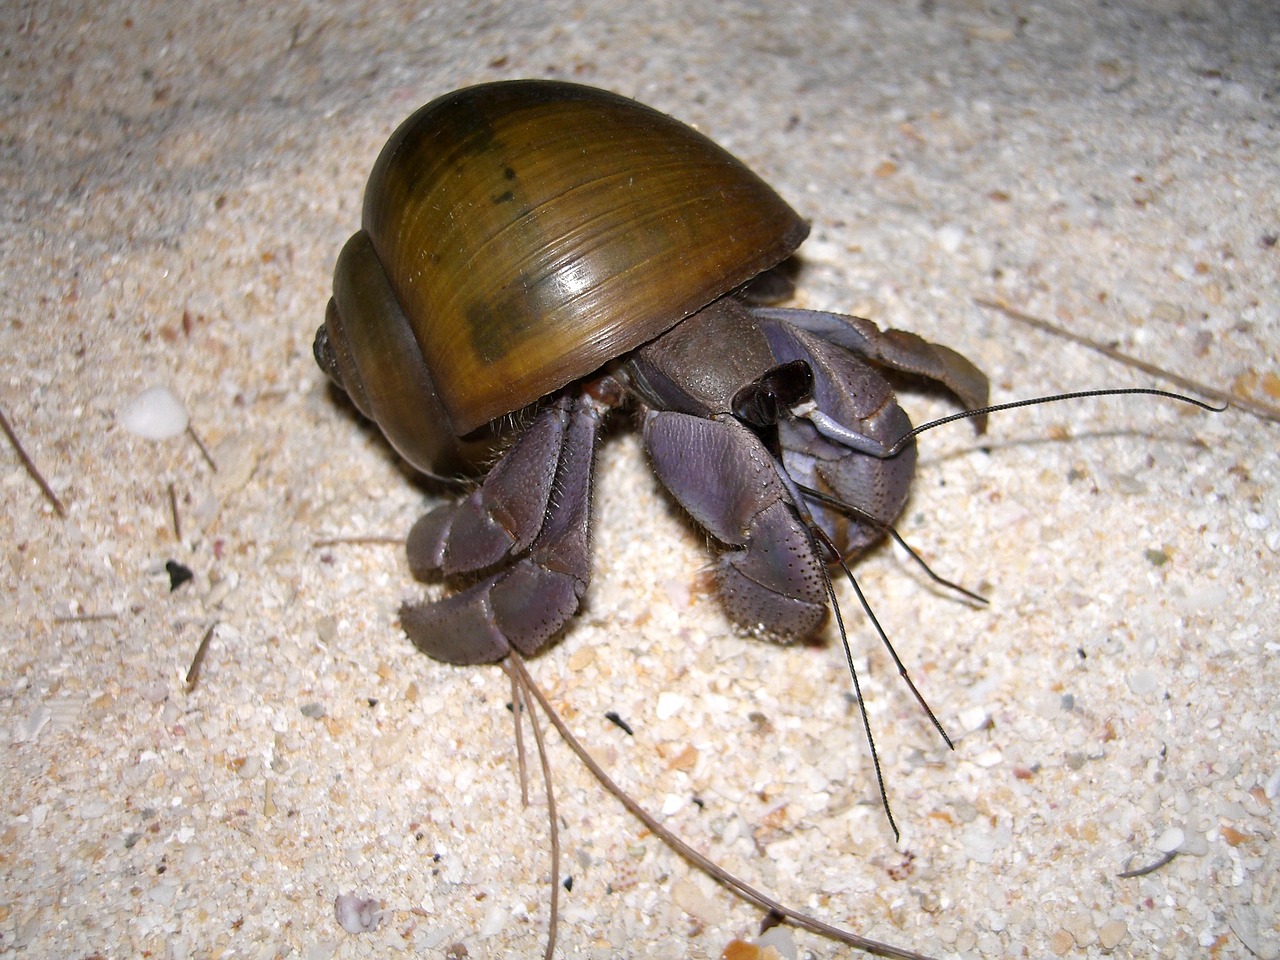 a close up of a small crab with a shell on it's back, flickr, dada, cockroach, tick helmet, malaysian, 2009)